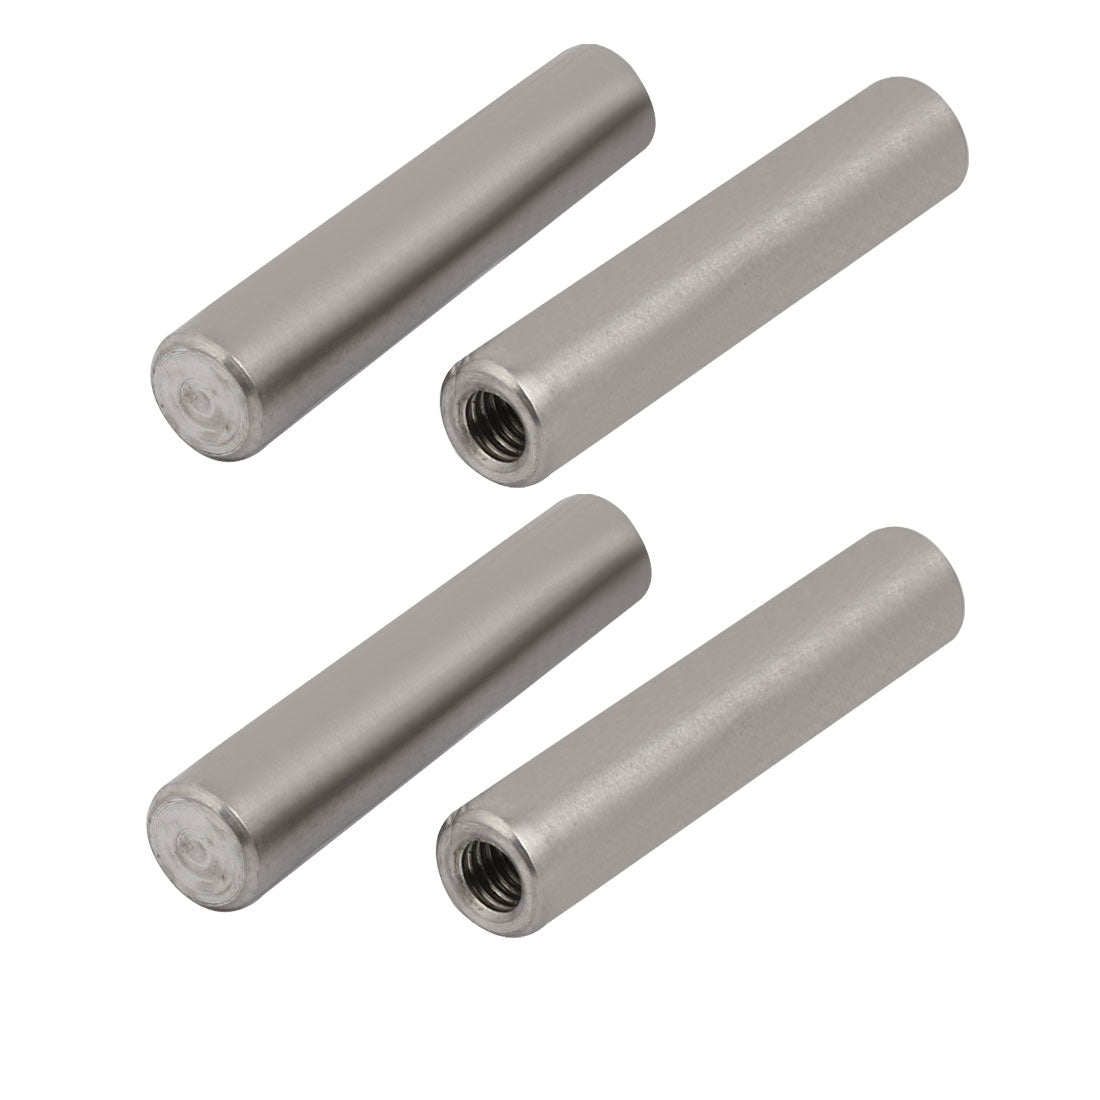 uxcell Uxcell 304 Stainless Steel M6 Female Thread 10mm x 50mm Cylindrical Dowel Pin 4pcs